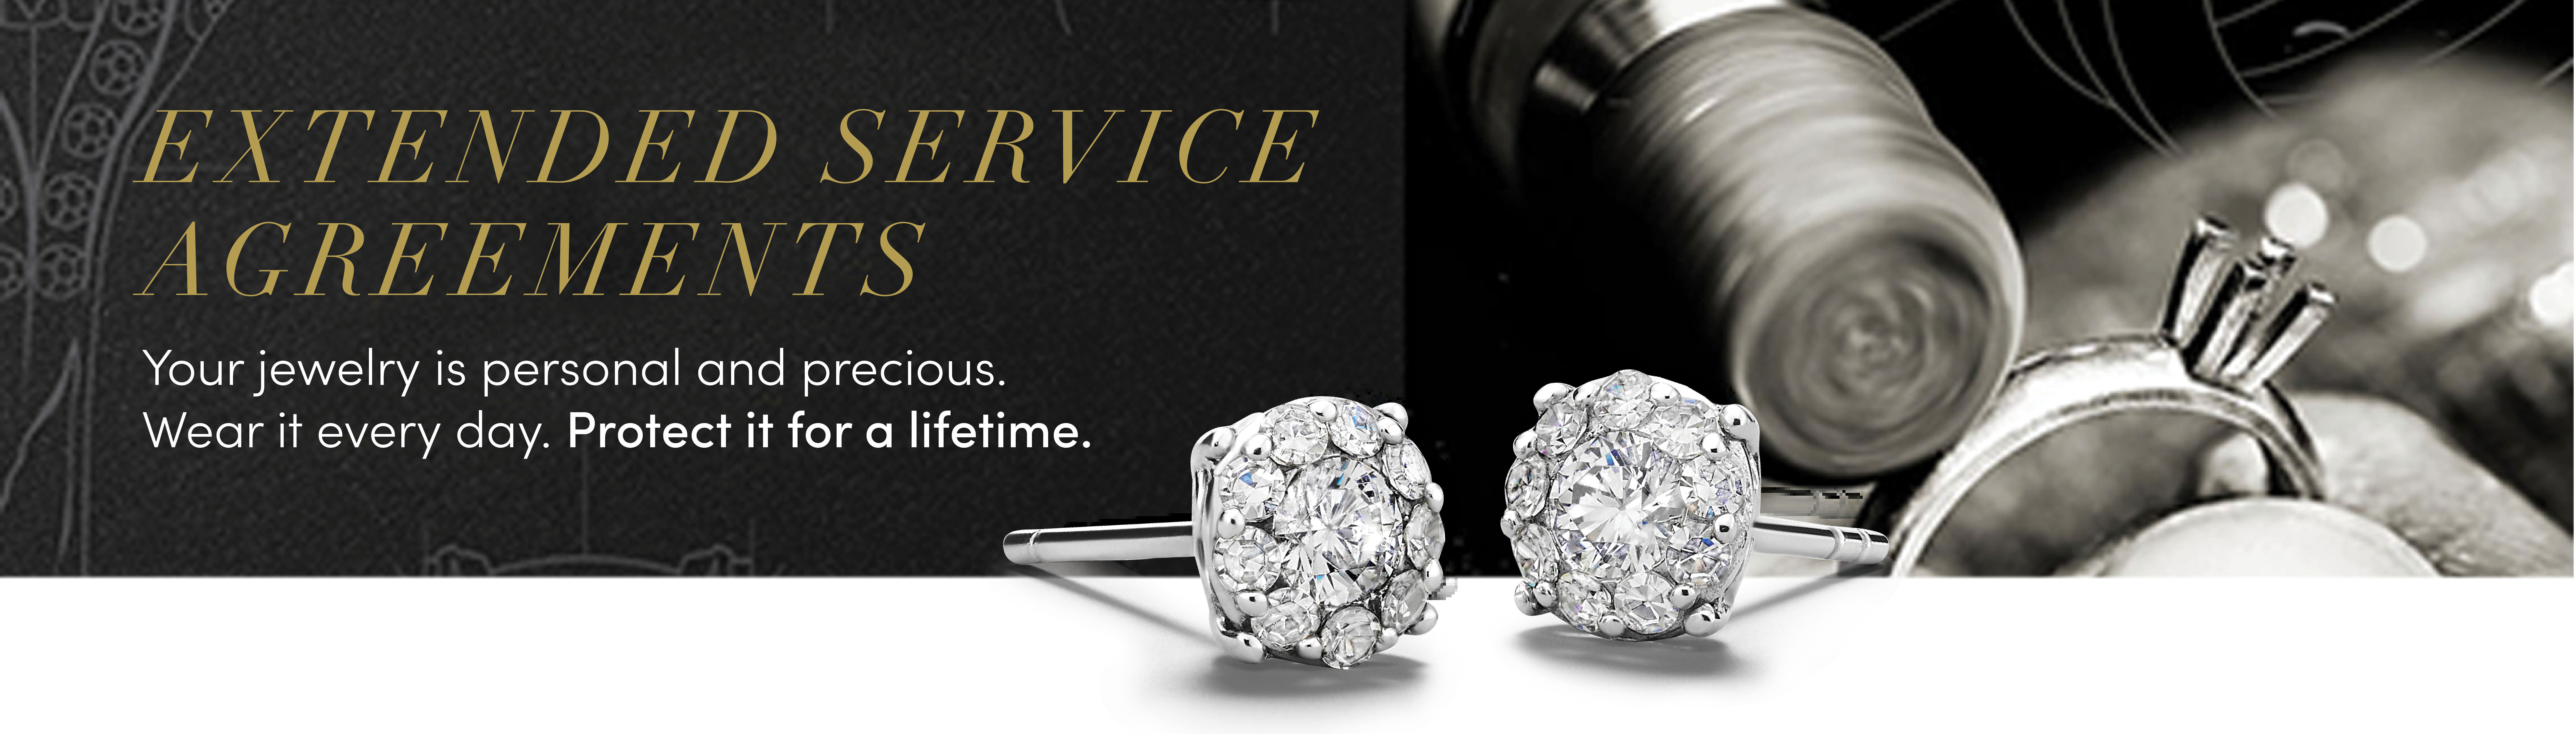 EXTENDED SERVICE AGREEMENTS Your jewelry is person and precious. Wear it everyday. Protect it for a lifetime. Image shows diamond earrings and a ring being repaired on a black textured background.